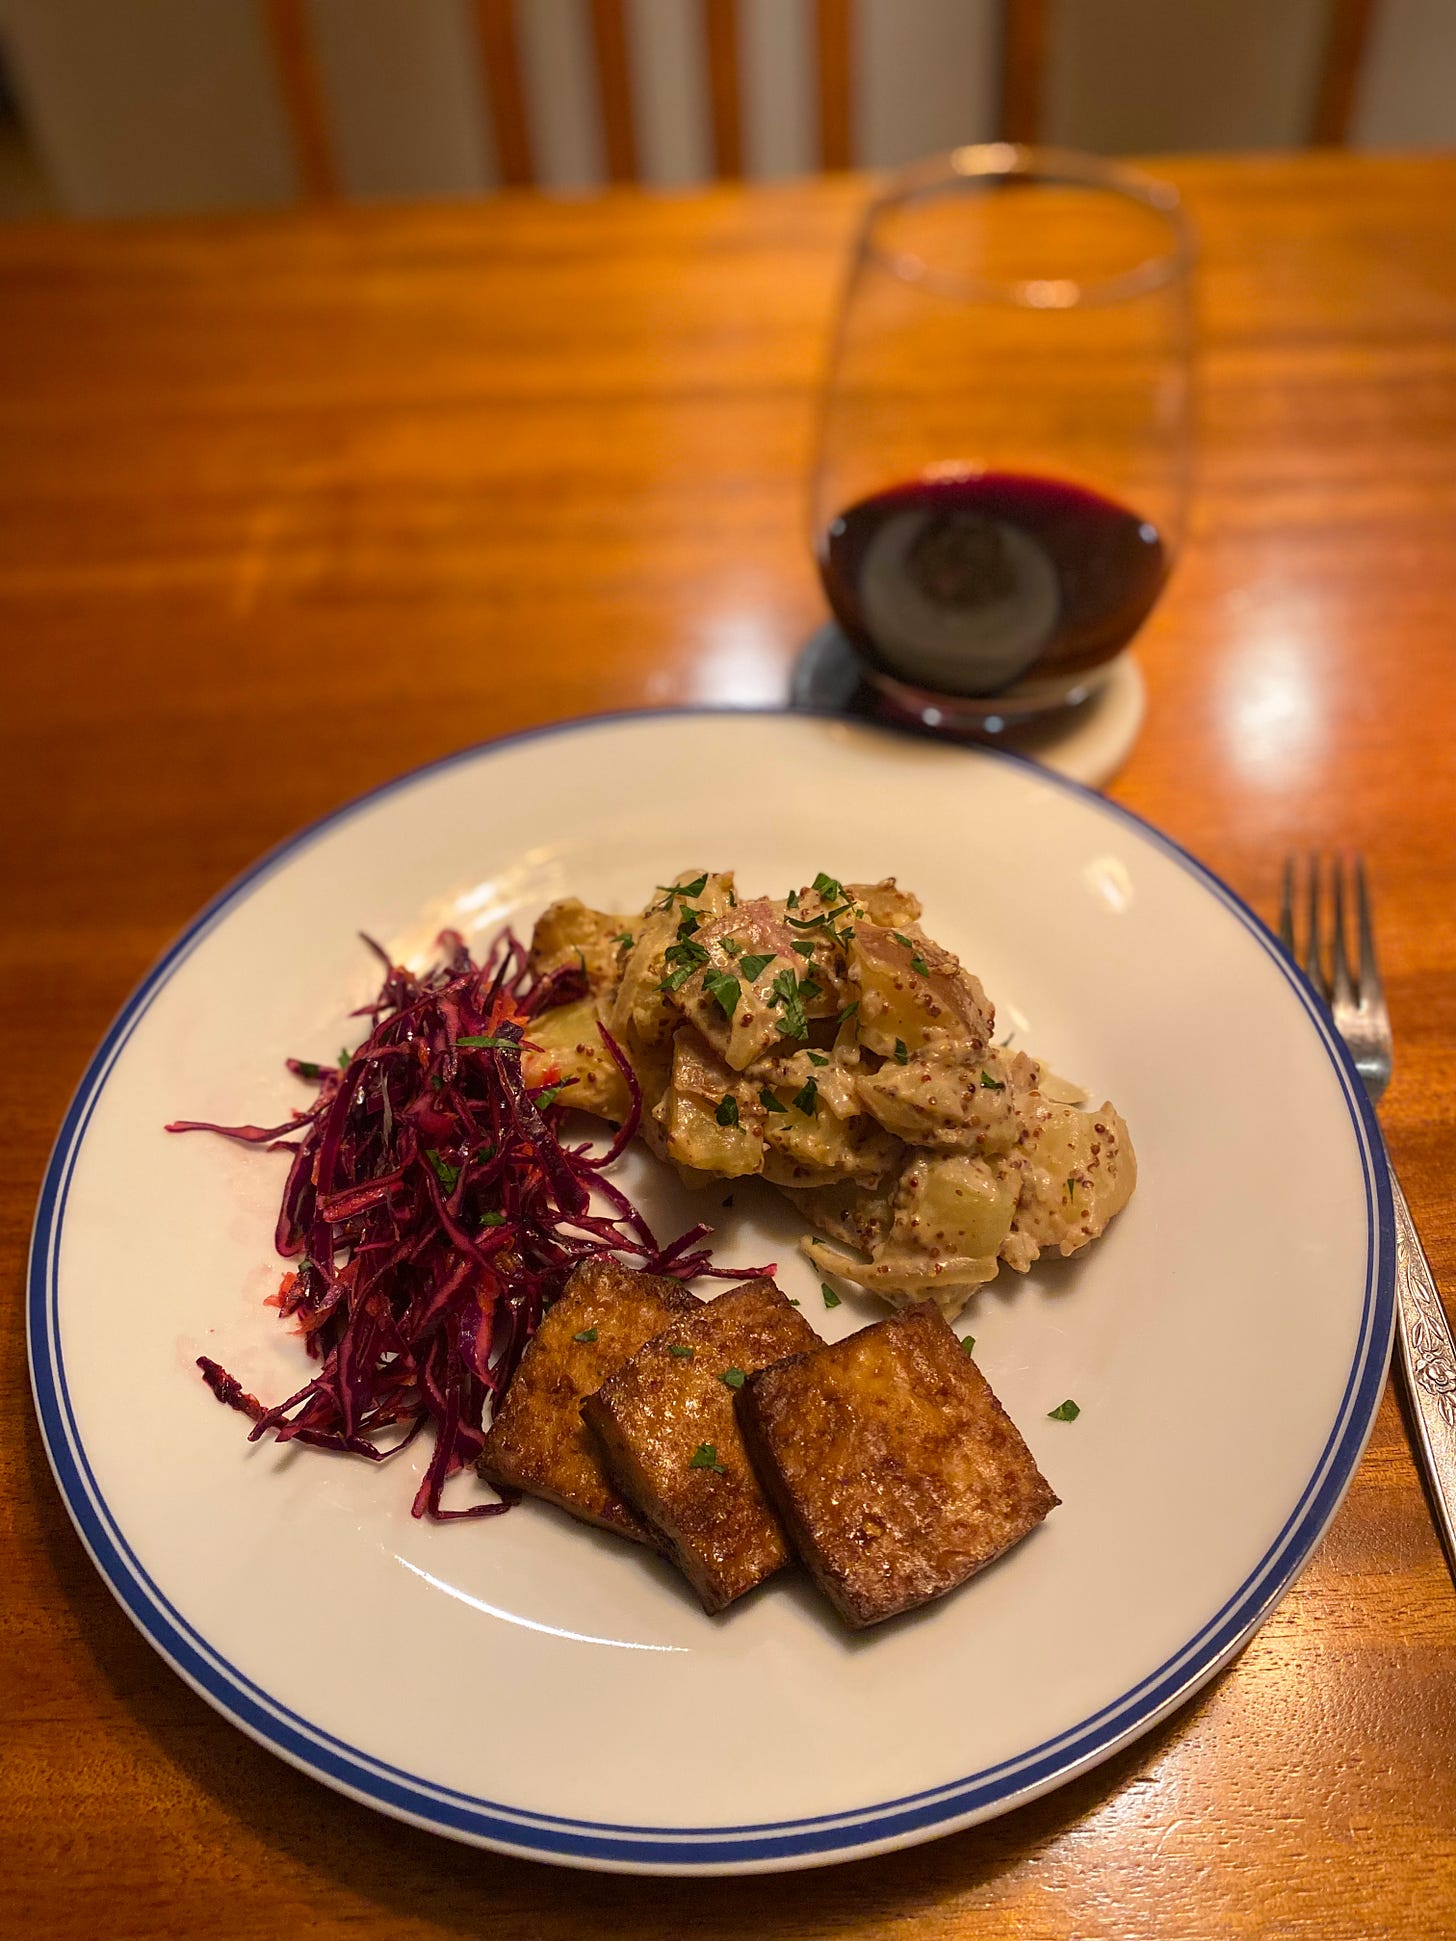 A dinner plate with three large squares of dark brown marinated tofu arranged next to a grainy mustard potato salad in the upper right, and a red cabbage and carrot slaw on the left. On a coaster behind and to the right of the plate is a stemless glass of red wine.